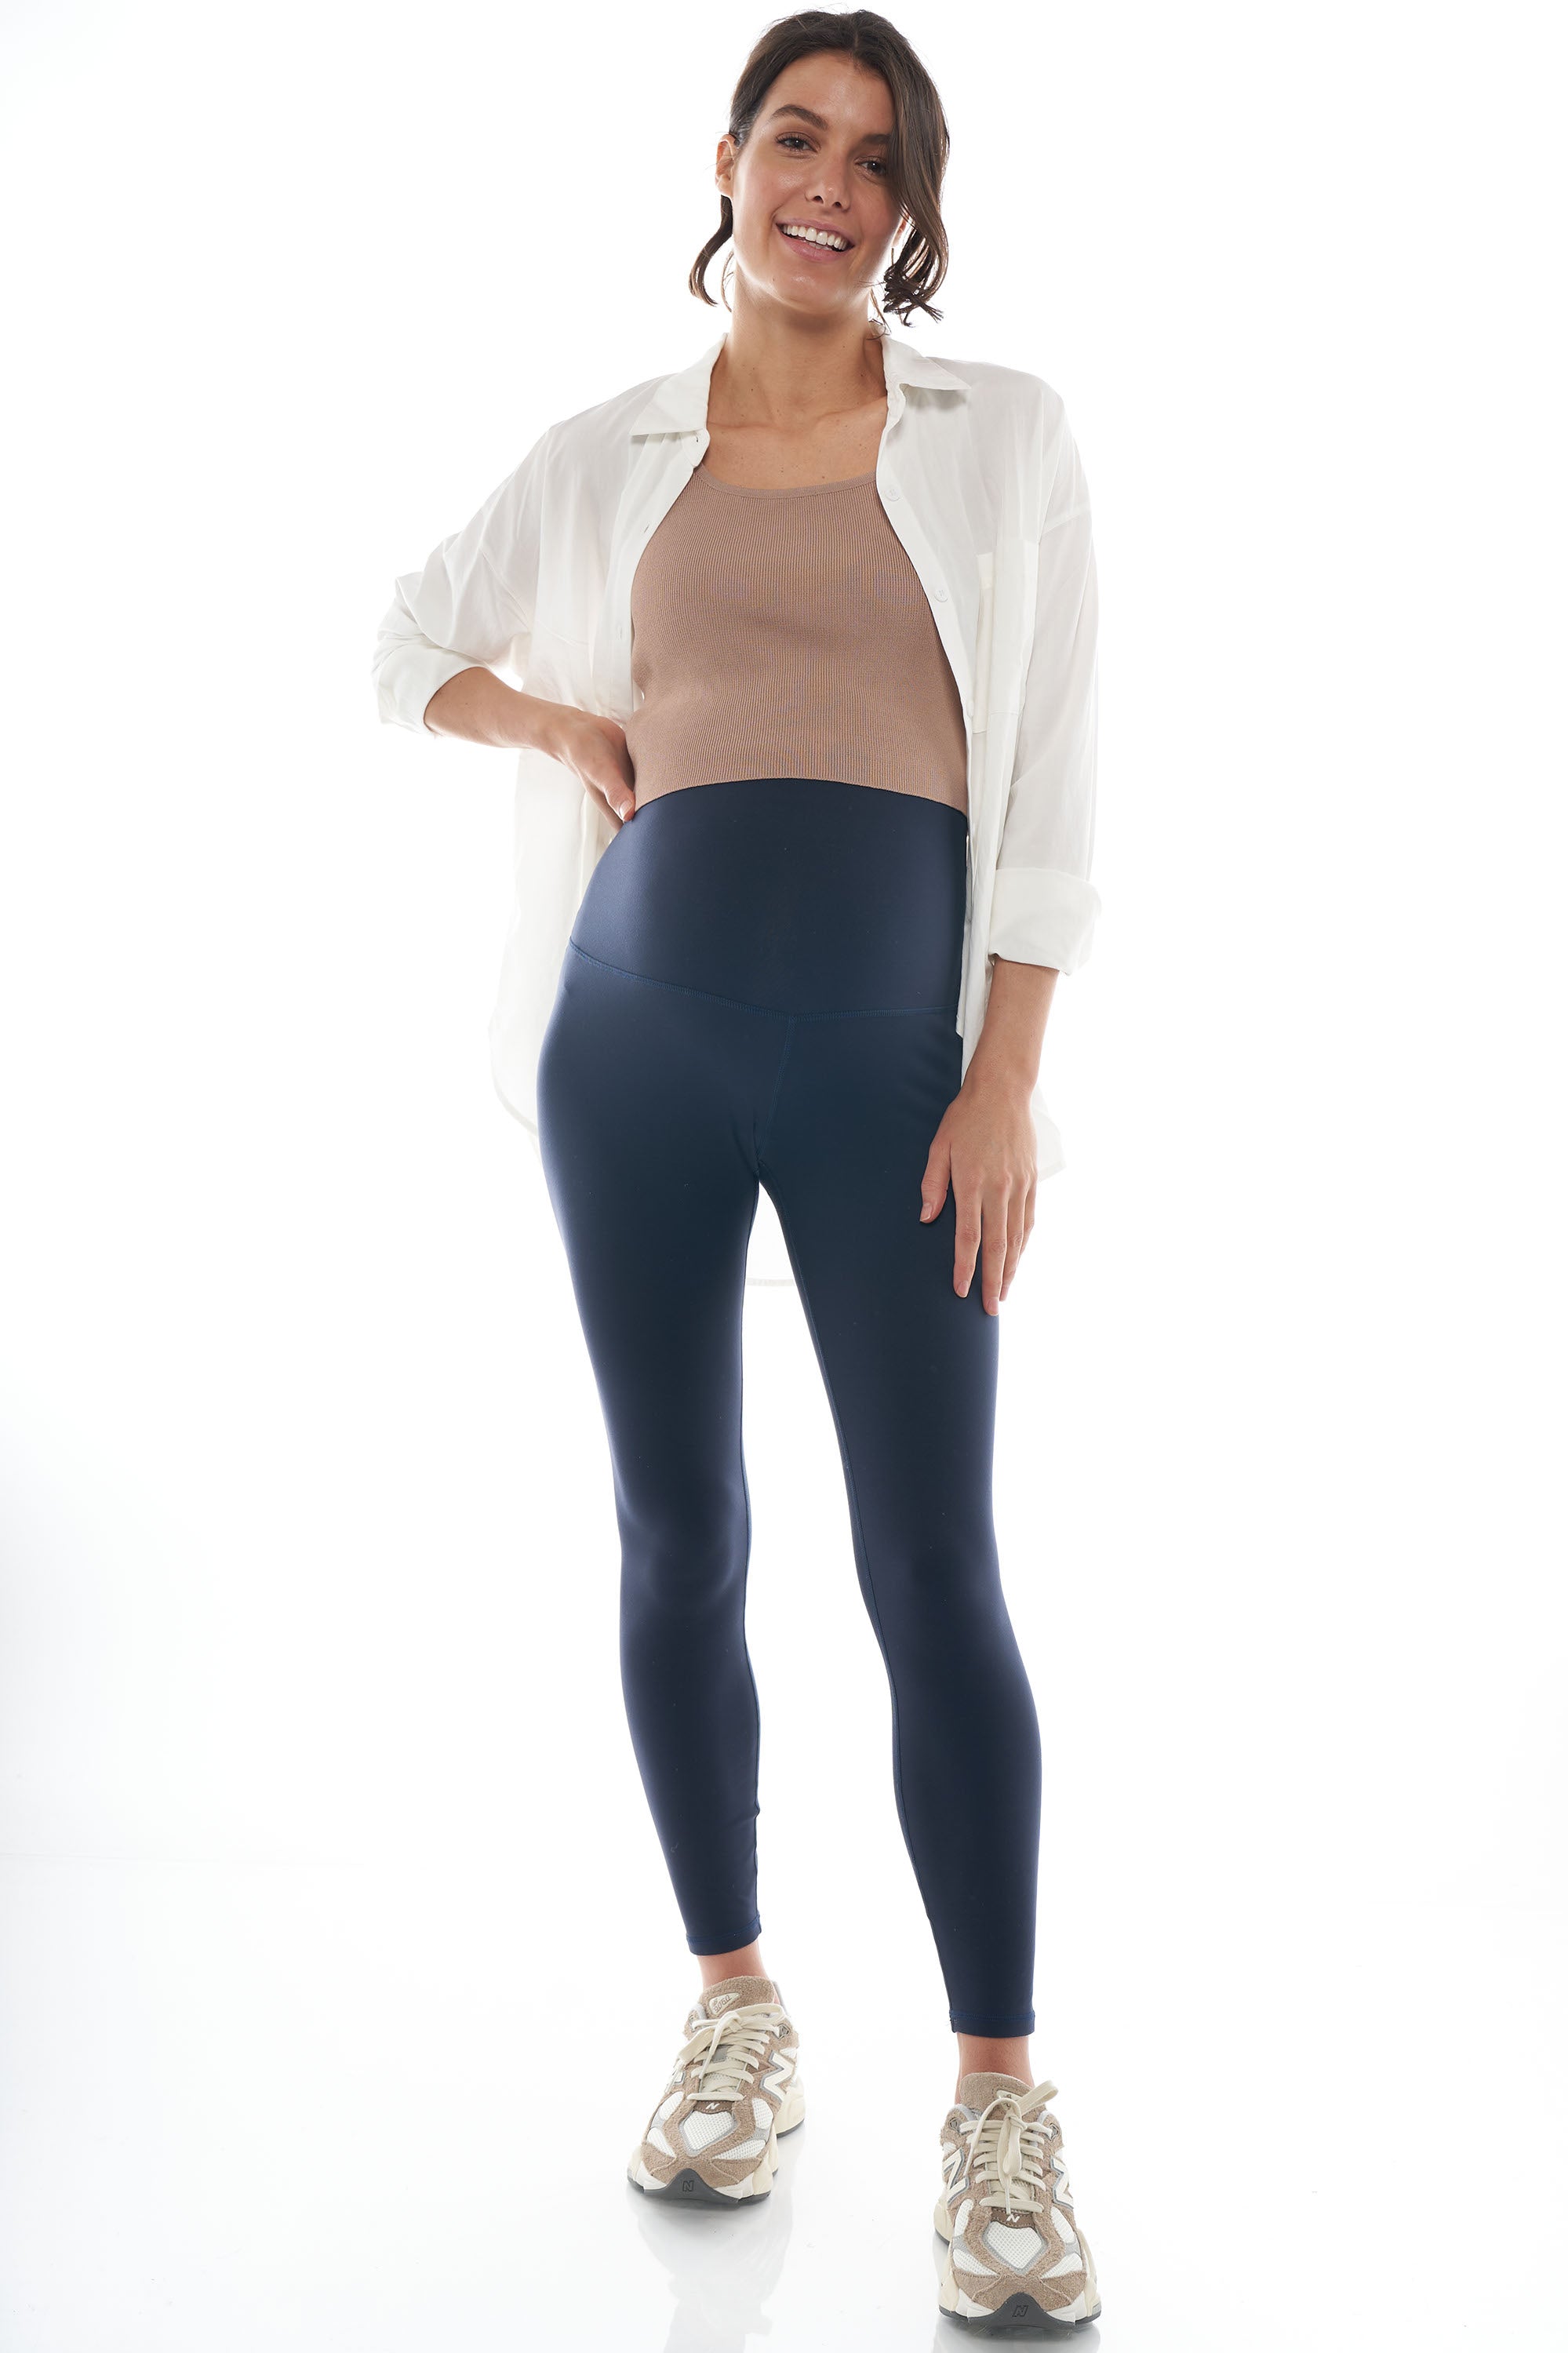 The Mom Store Comfy Belly Over Solid Maternity Leggings Navy Blue Online in  India, Buy at Best Price from Firstcry.com - 11795381